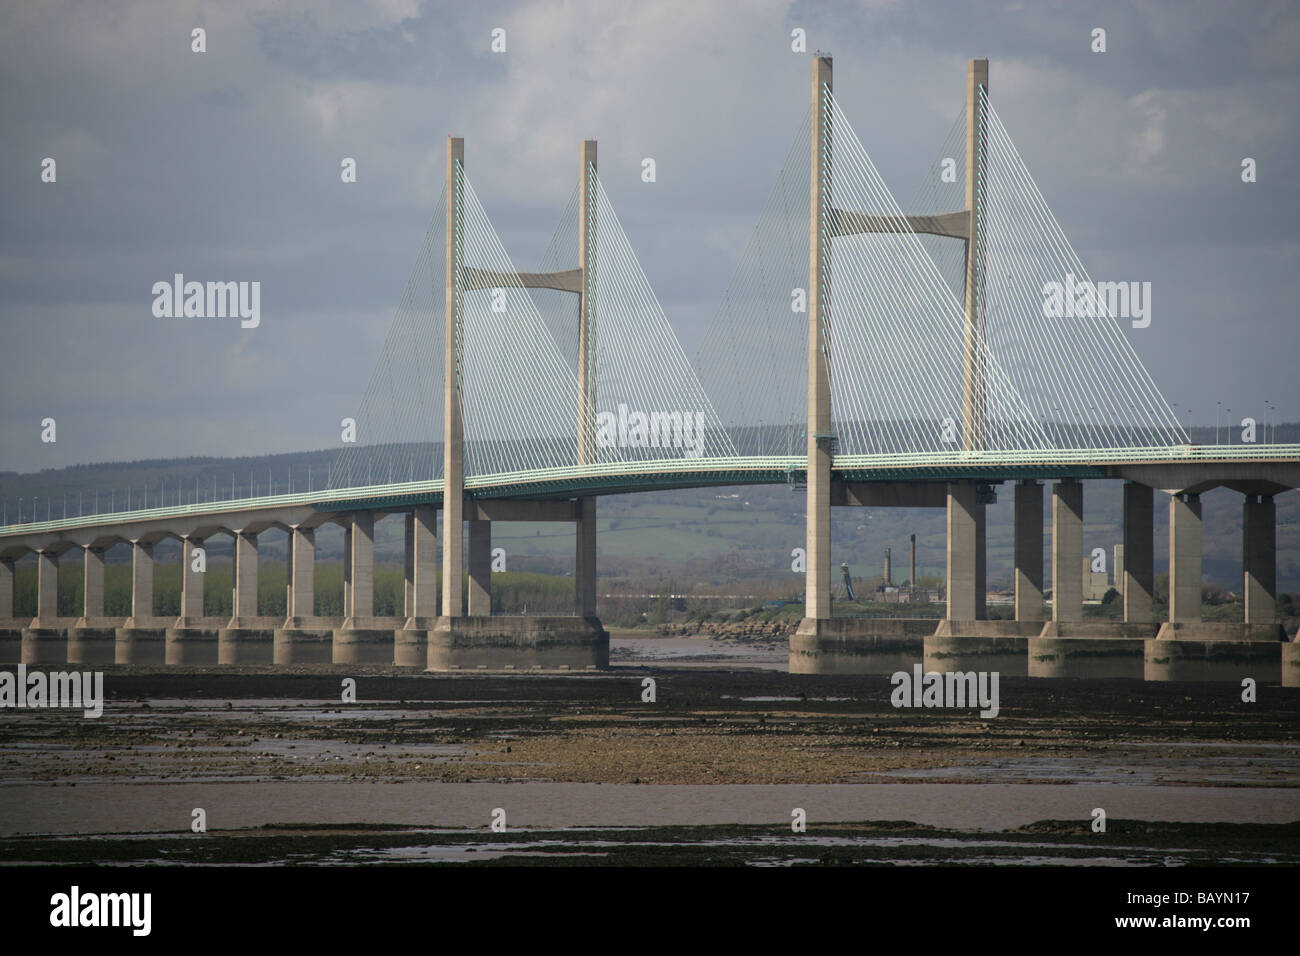 View looking west towards Wales of the M4 Motorway Second Severn Bridge Shoots Towers, over the River Severn. Stock Photo